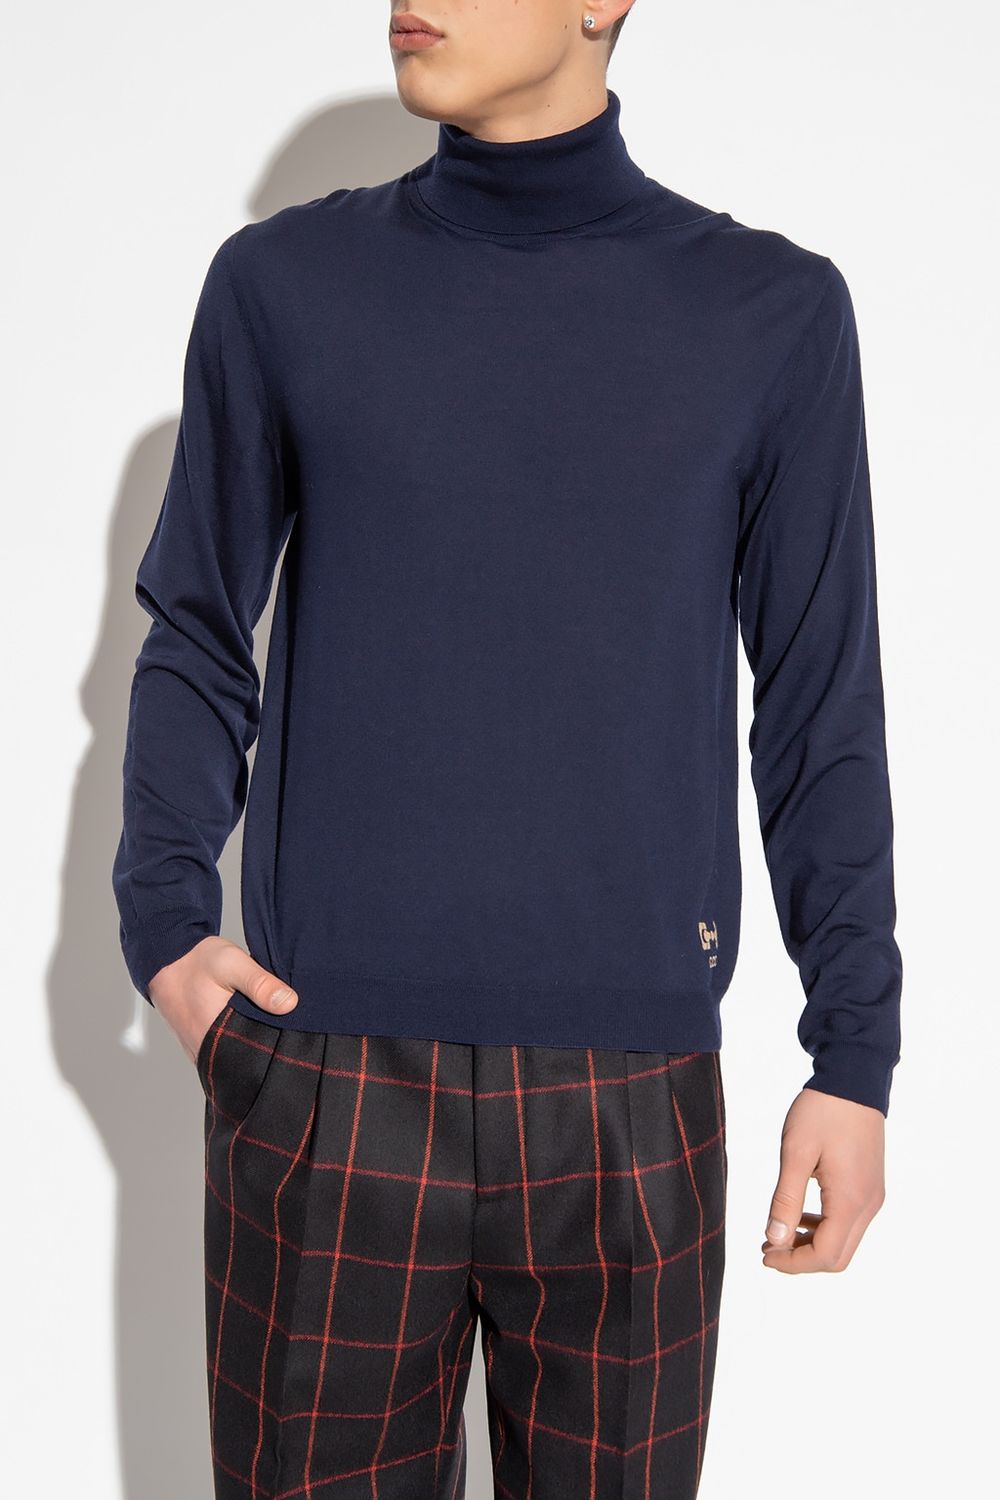 GUCCI Men's Blue Wool Turtleneck Sweater for SS23